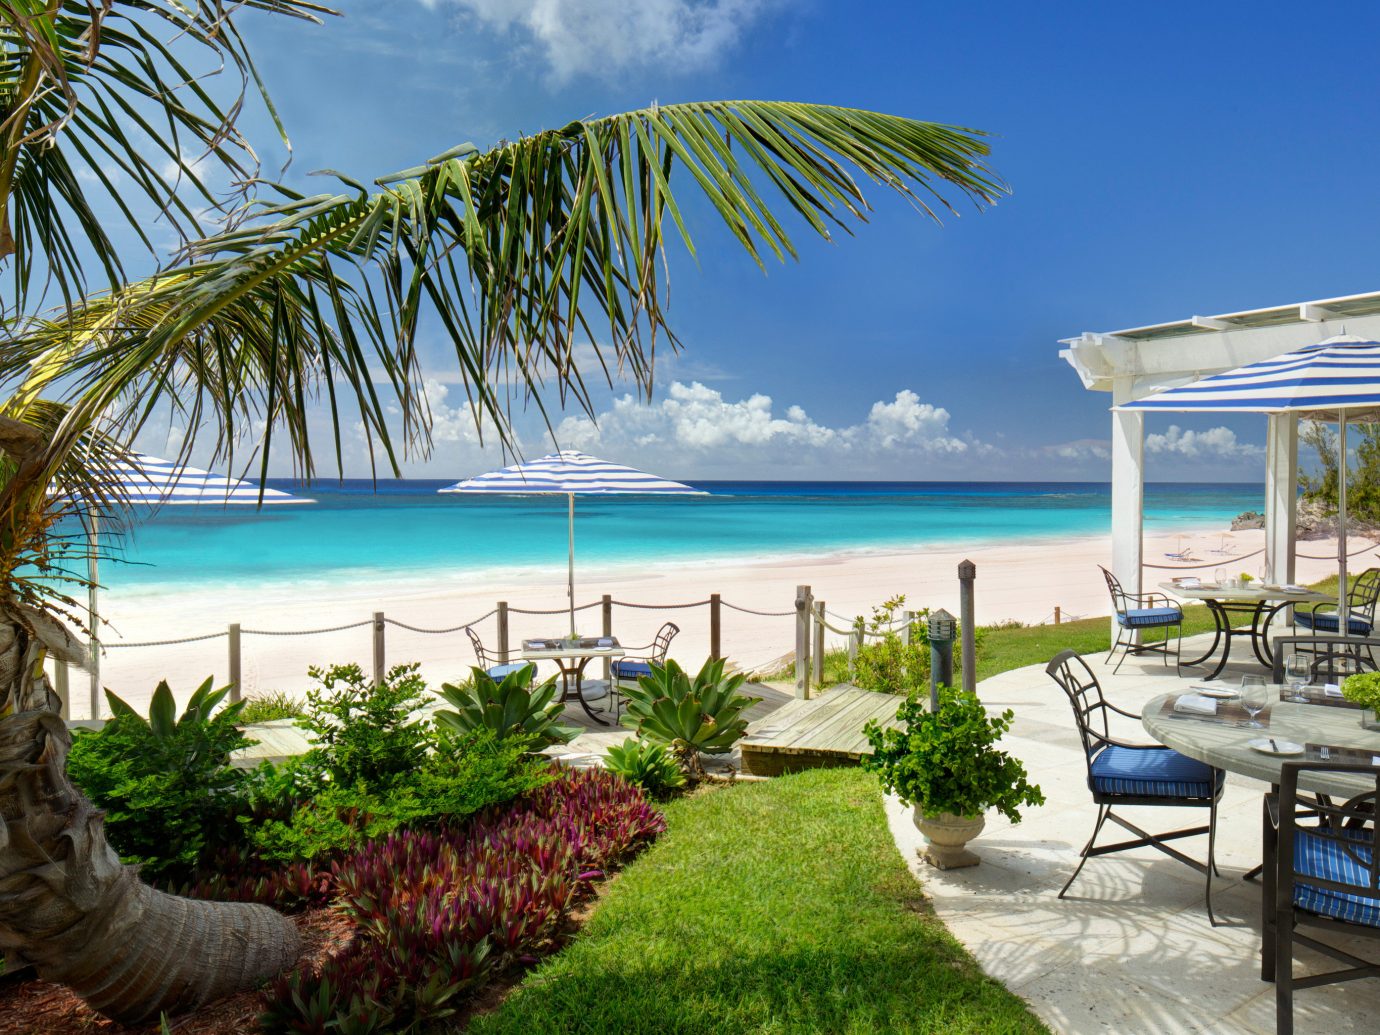 Beach Beachfront Hotels Island Lounge Outdoors Trip Ideas Tropical Waterfront outdoor water tree sky palm umbrella chair Ocean property leisure caribbean vacation swimming pool plant Pool lawn Resort arecales estate real estate tropics bay Villa condominium Sea overlooking shore lined sandy furniture shade